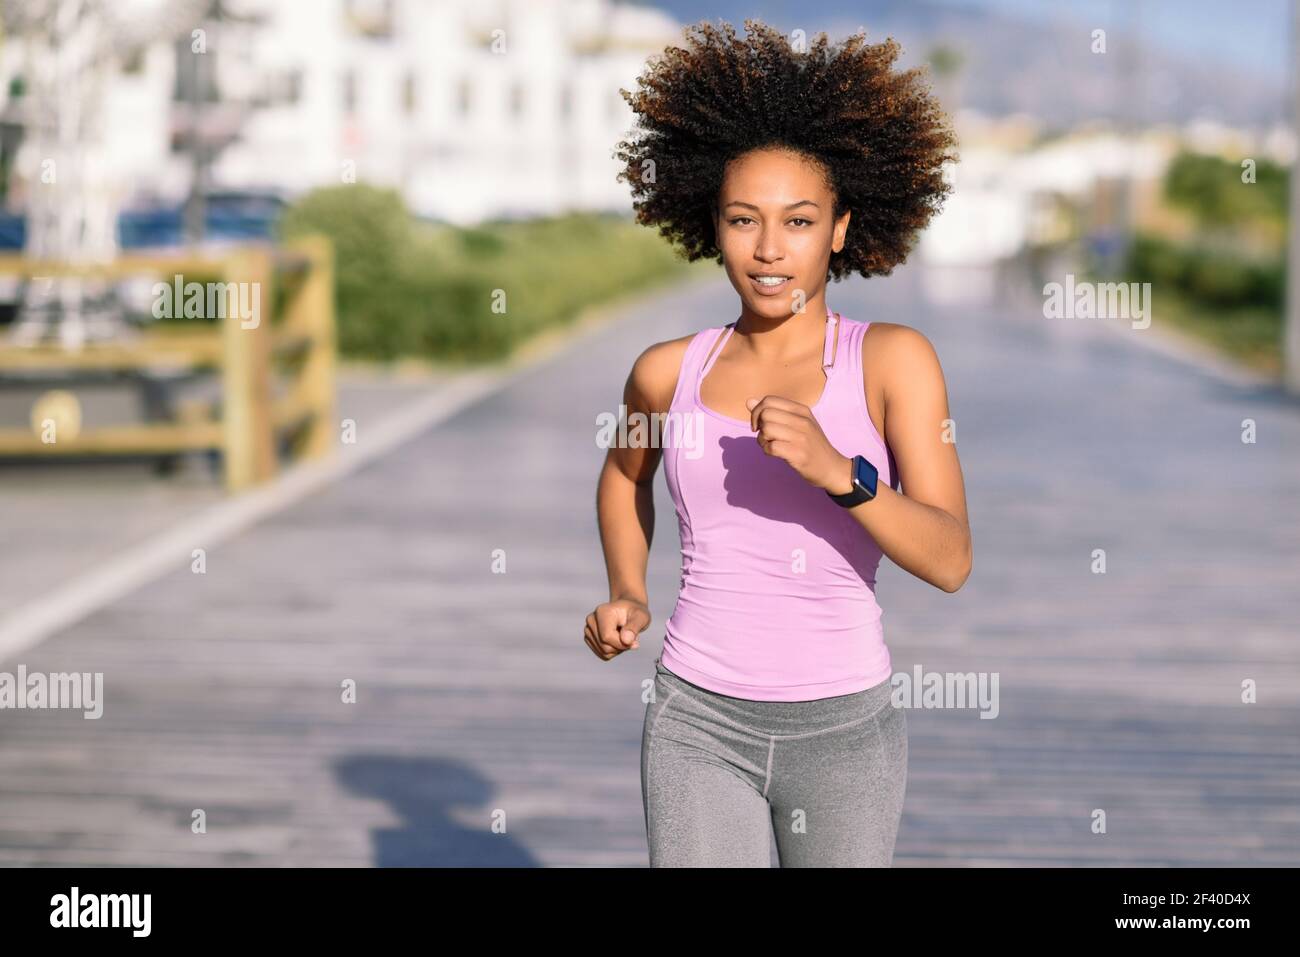 Black woman, afro hairstyle, running outdoors in urban road. Young female exercising in sport clothes. Stock Photo